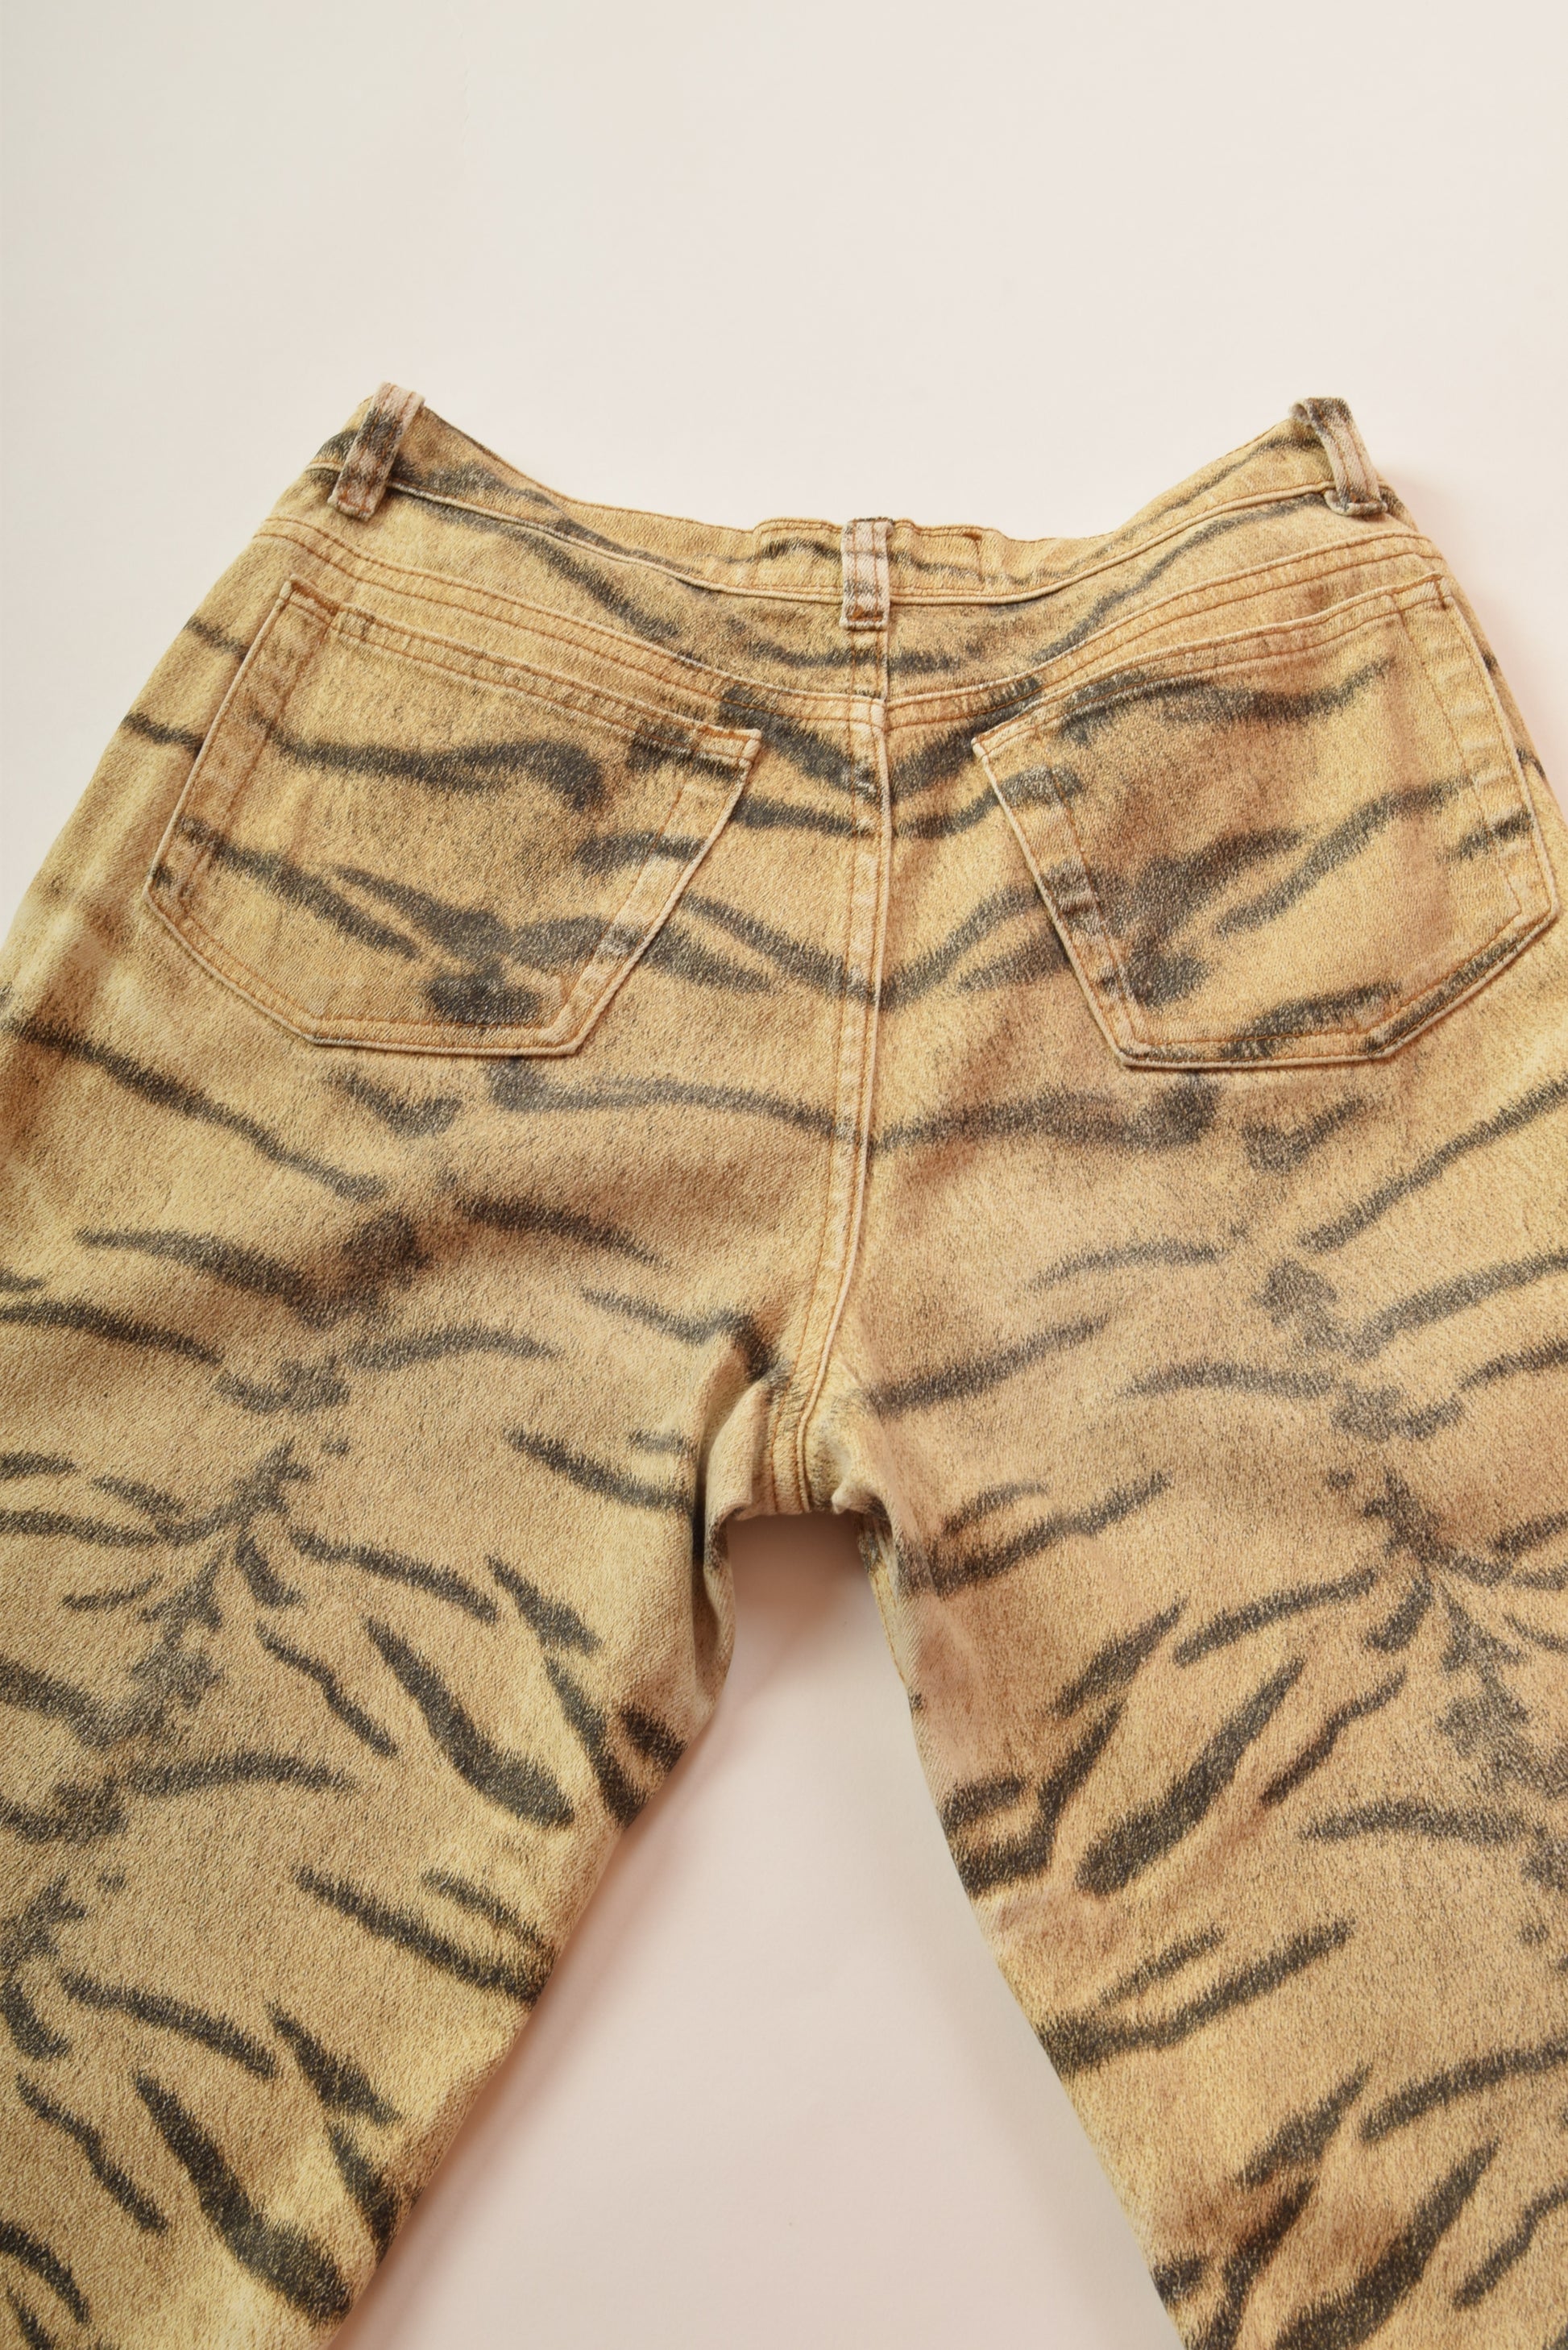 VINTAGE 90S ROBERTO CAVALLI JEANS MADE IN ITALY SIZE M 